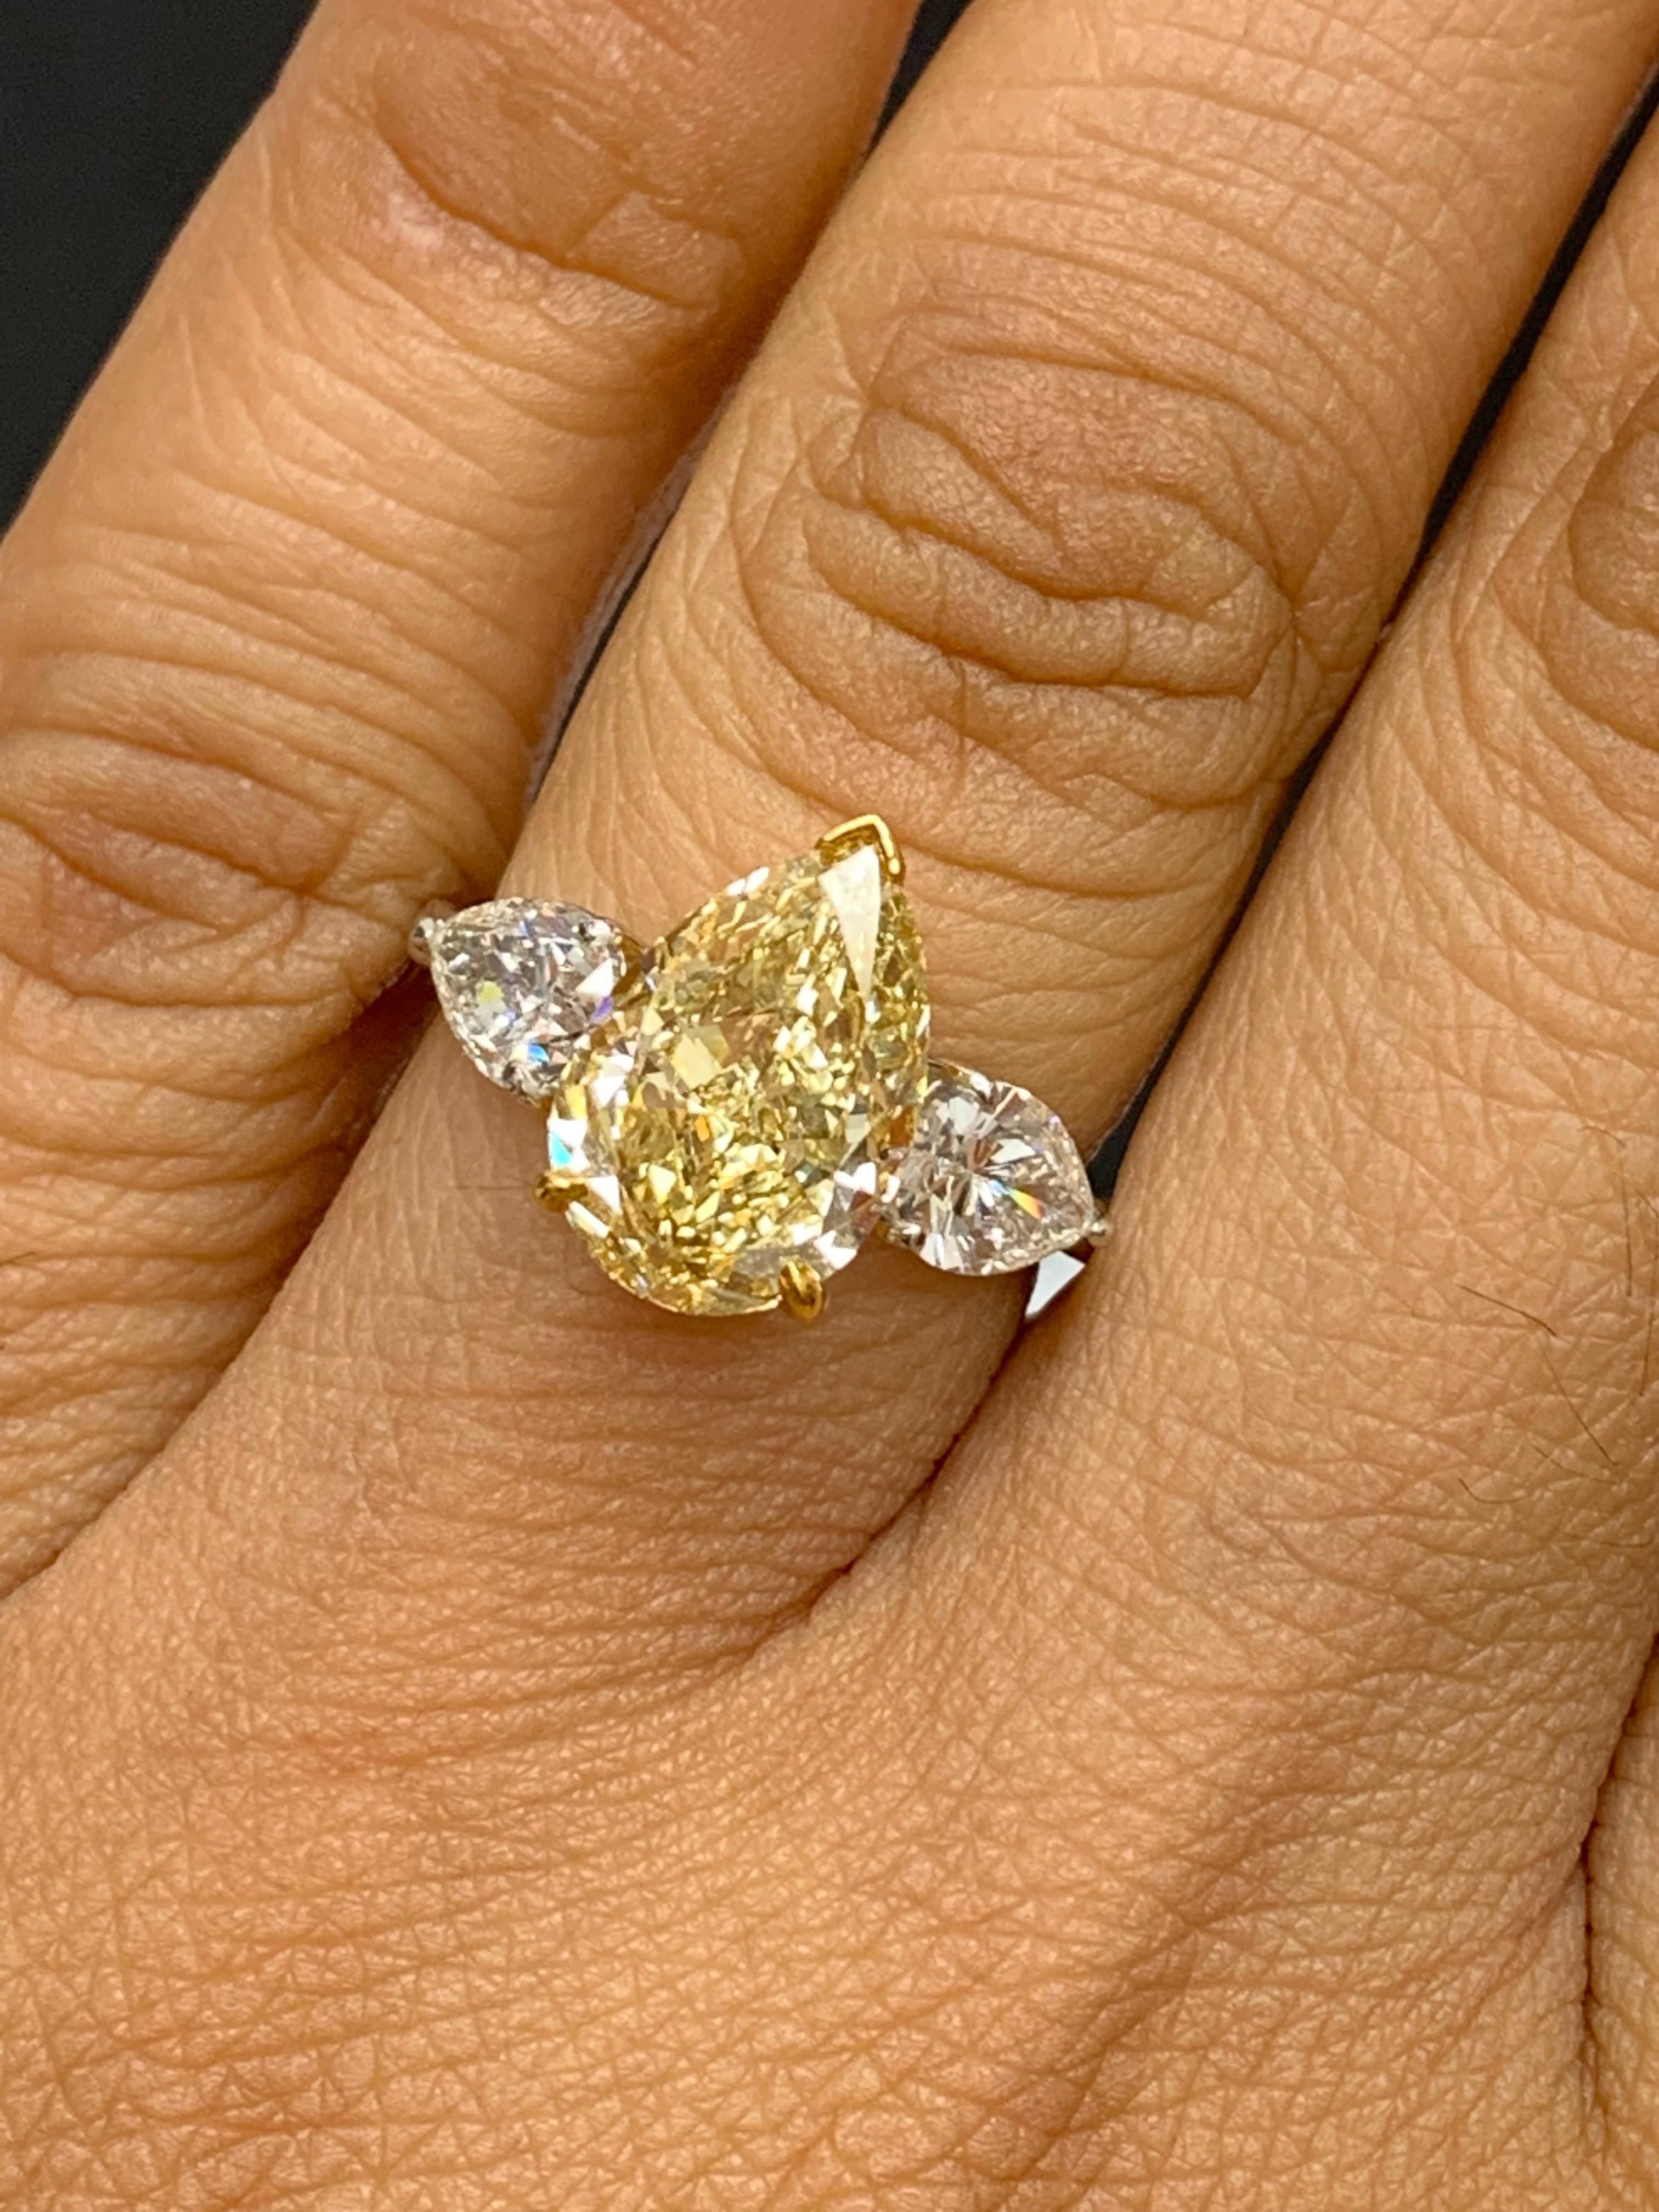 A stunning ring showcasing a rich intense pear-shaped fancy yellow diamond weighing 3.15 carats  Flanking the center stone are two brilliant pear shape diamonds, weighing 1.58 carats total, Made in platinum.